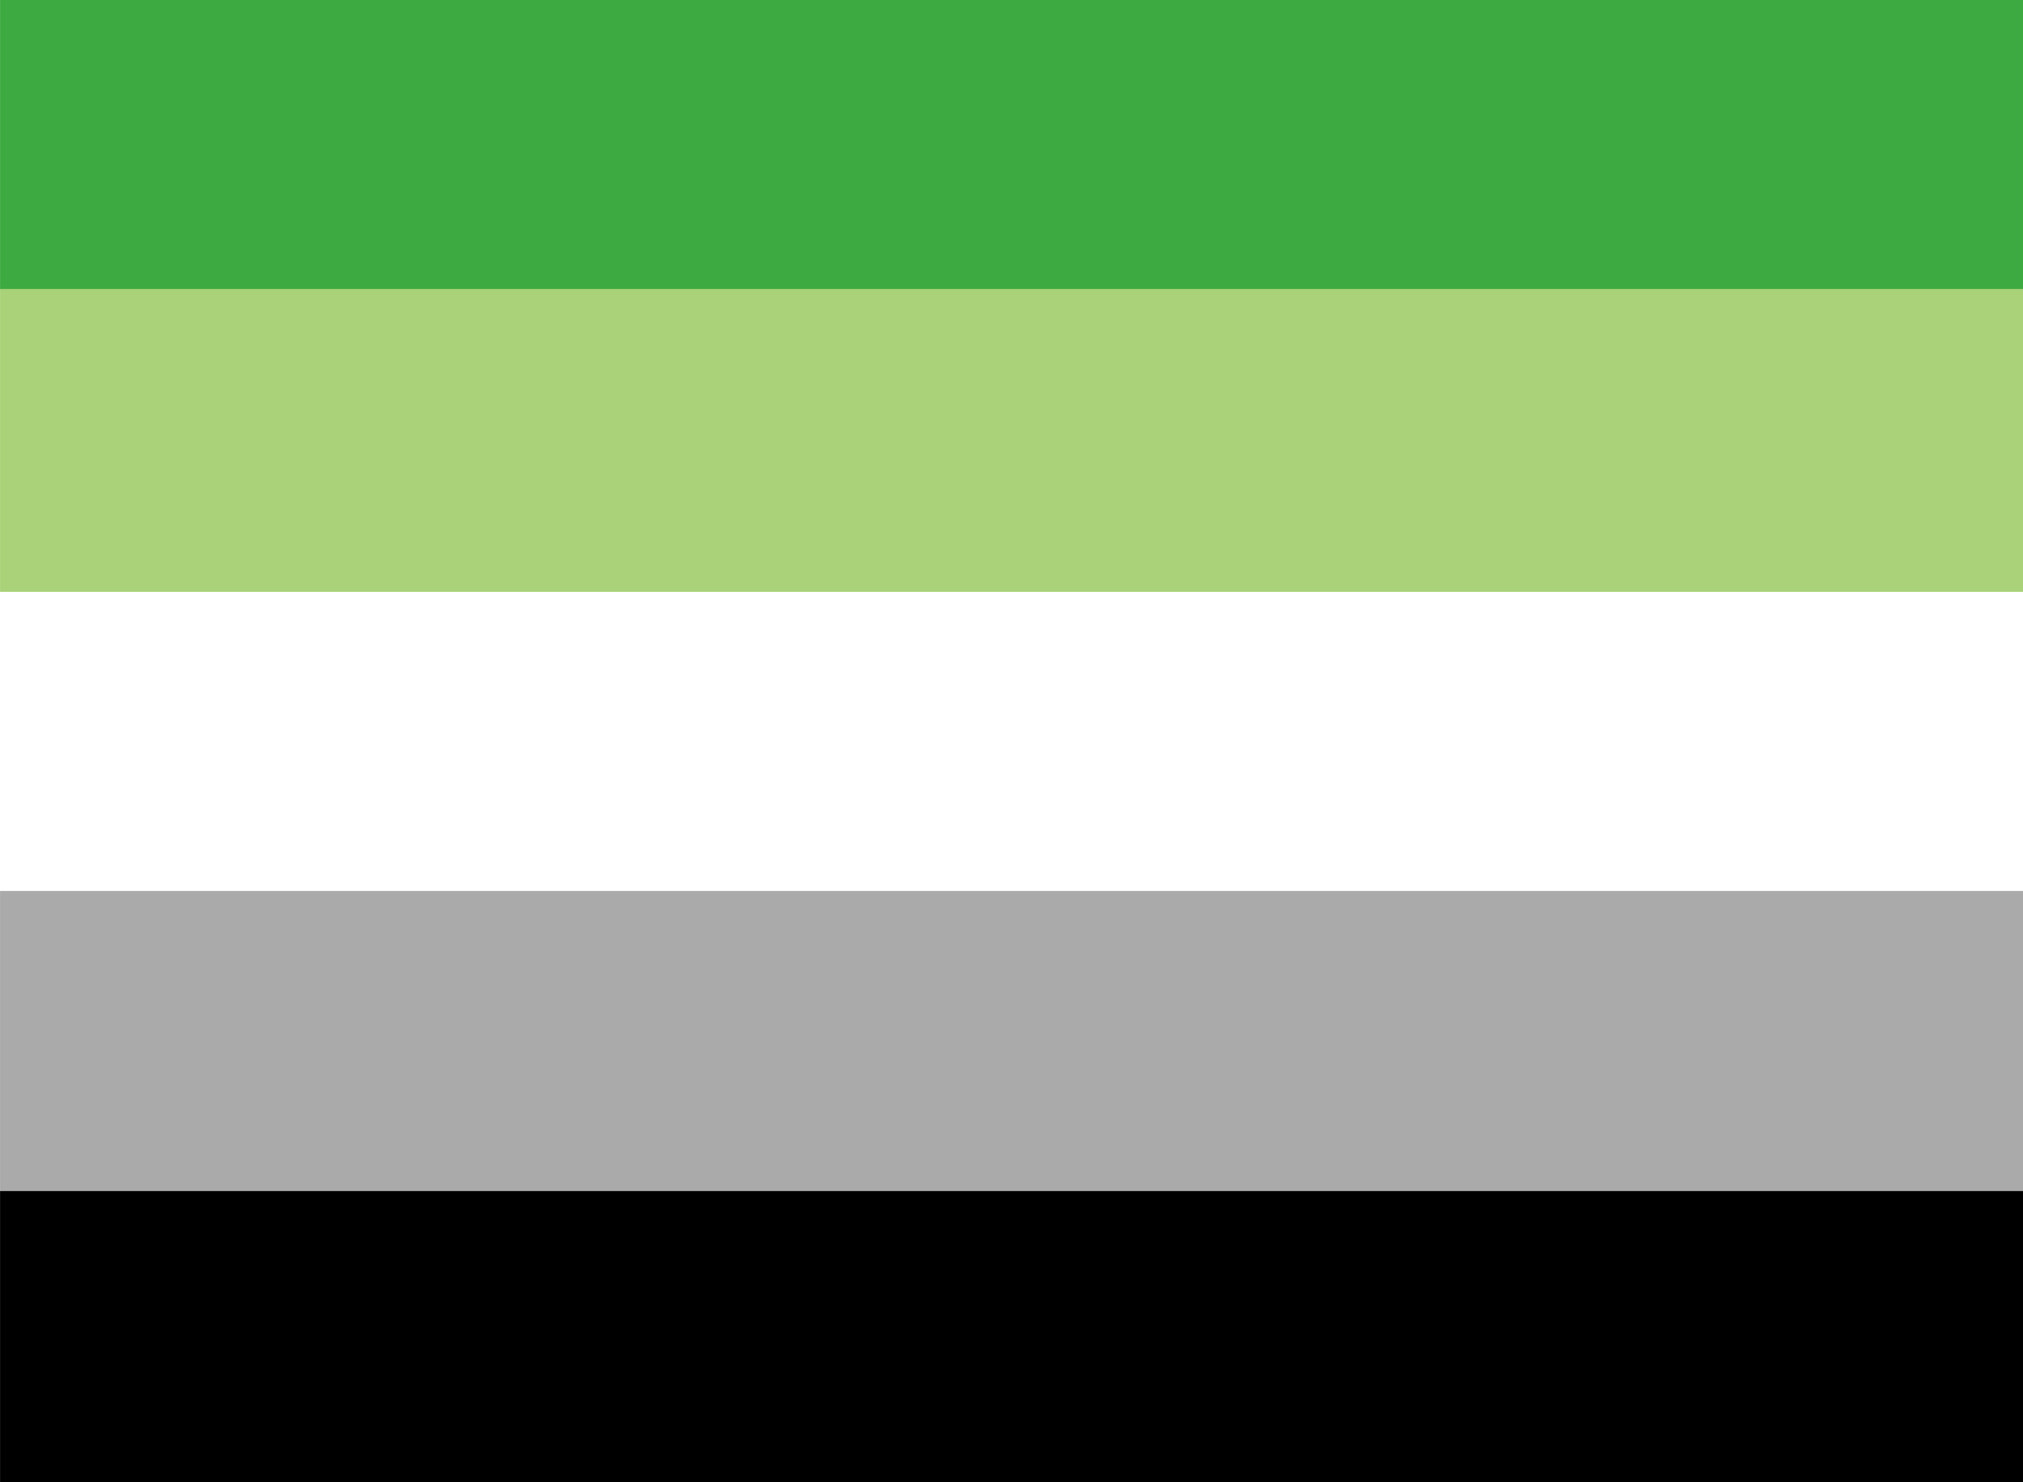 a striped flag with green, light green, white, gray, and black